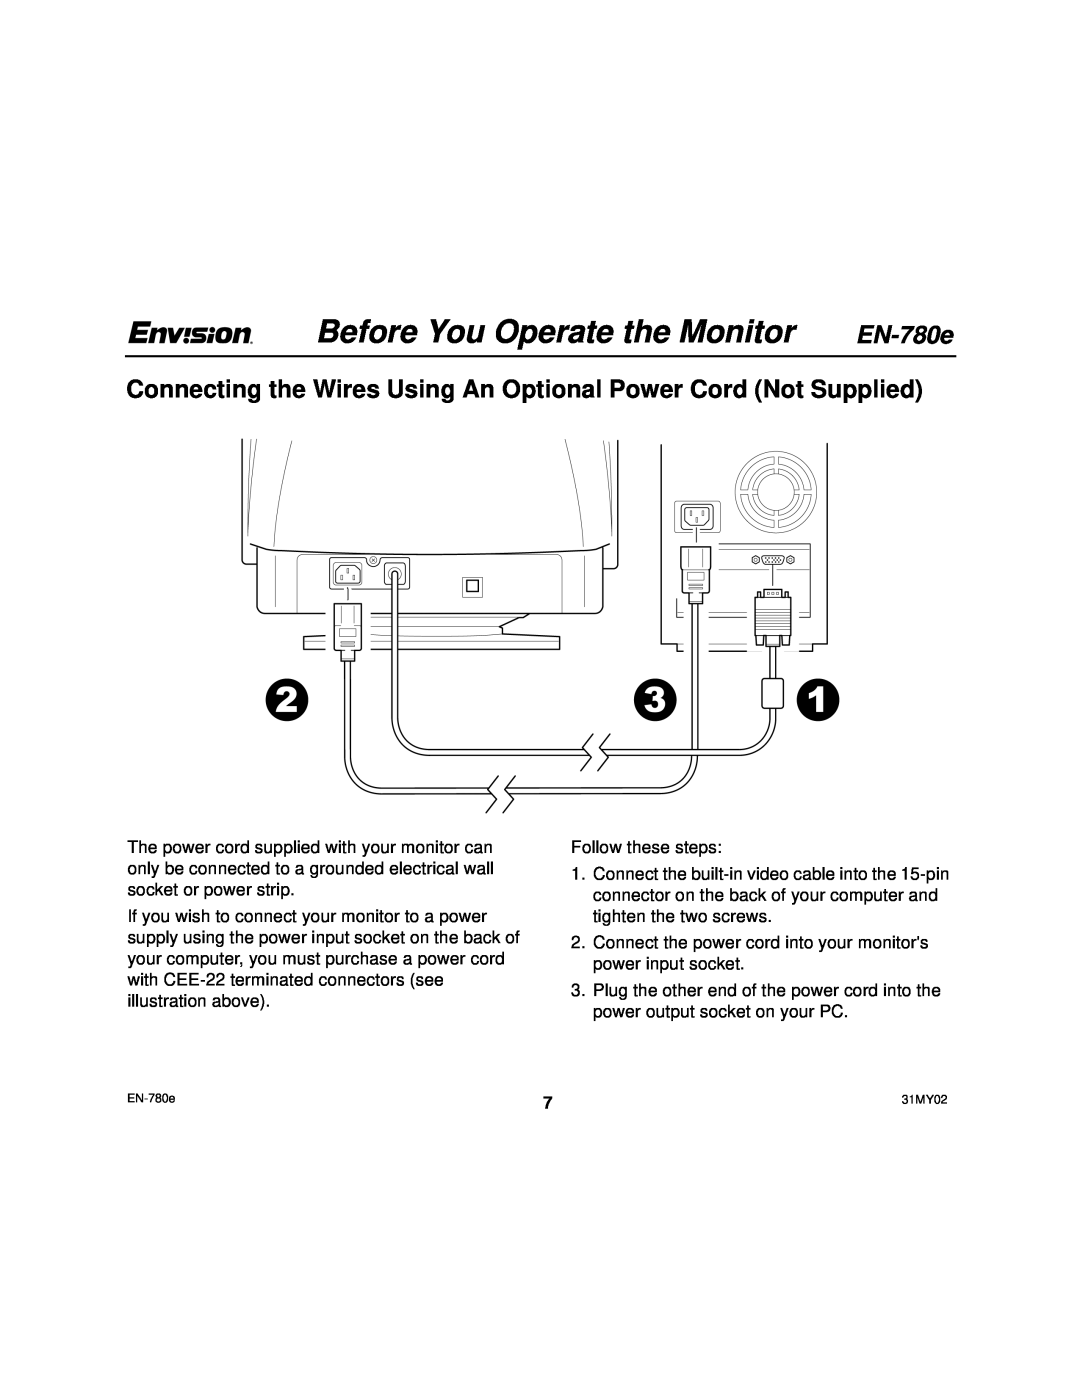 Envision Peripherals EN-780e user manual Connecting the Wires Using An Optional Power Cord Not Supplied 